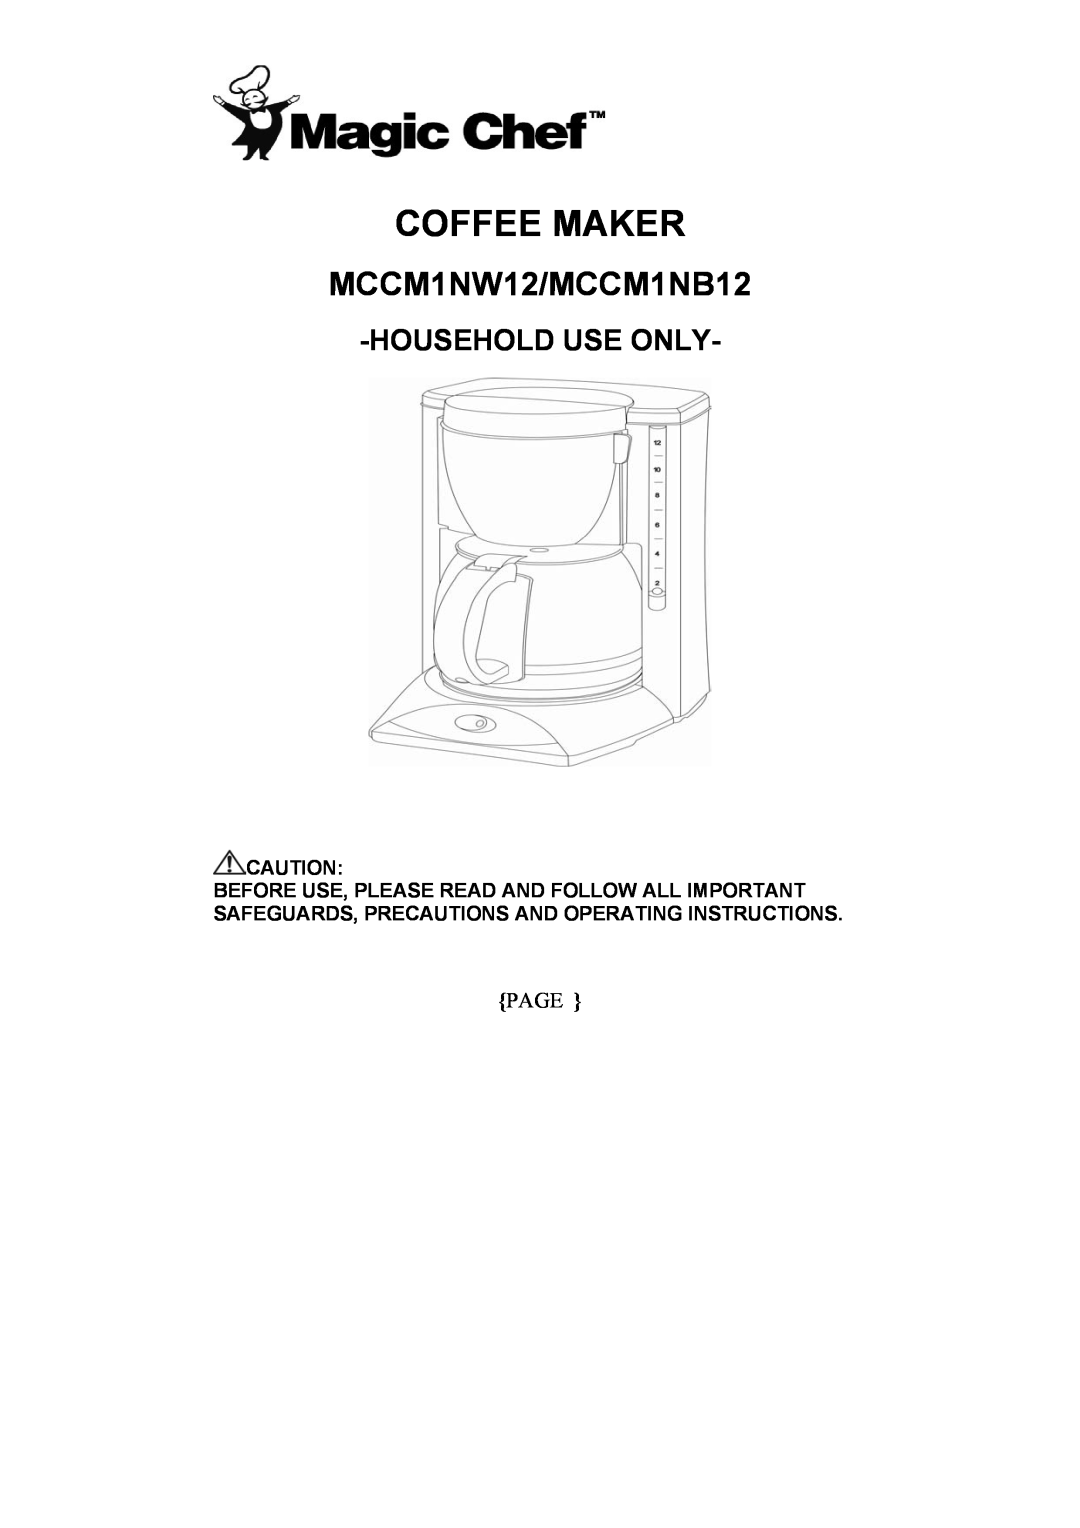 Maytag operating instructions Coffee Maker, MCCM1NW12/MCCM1NB12, Household Use Only, Page 